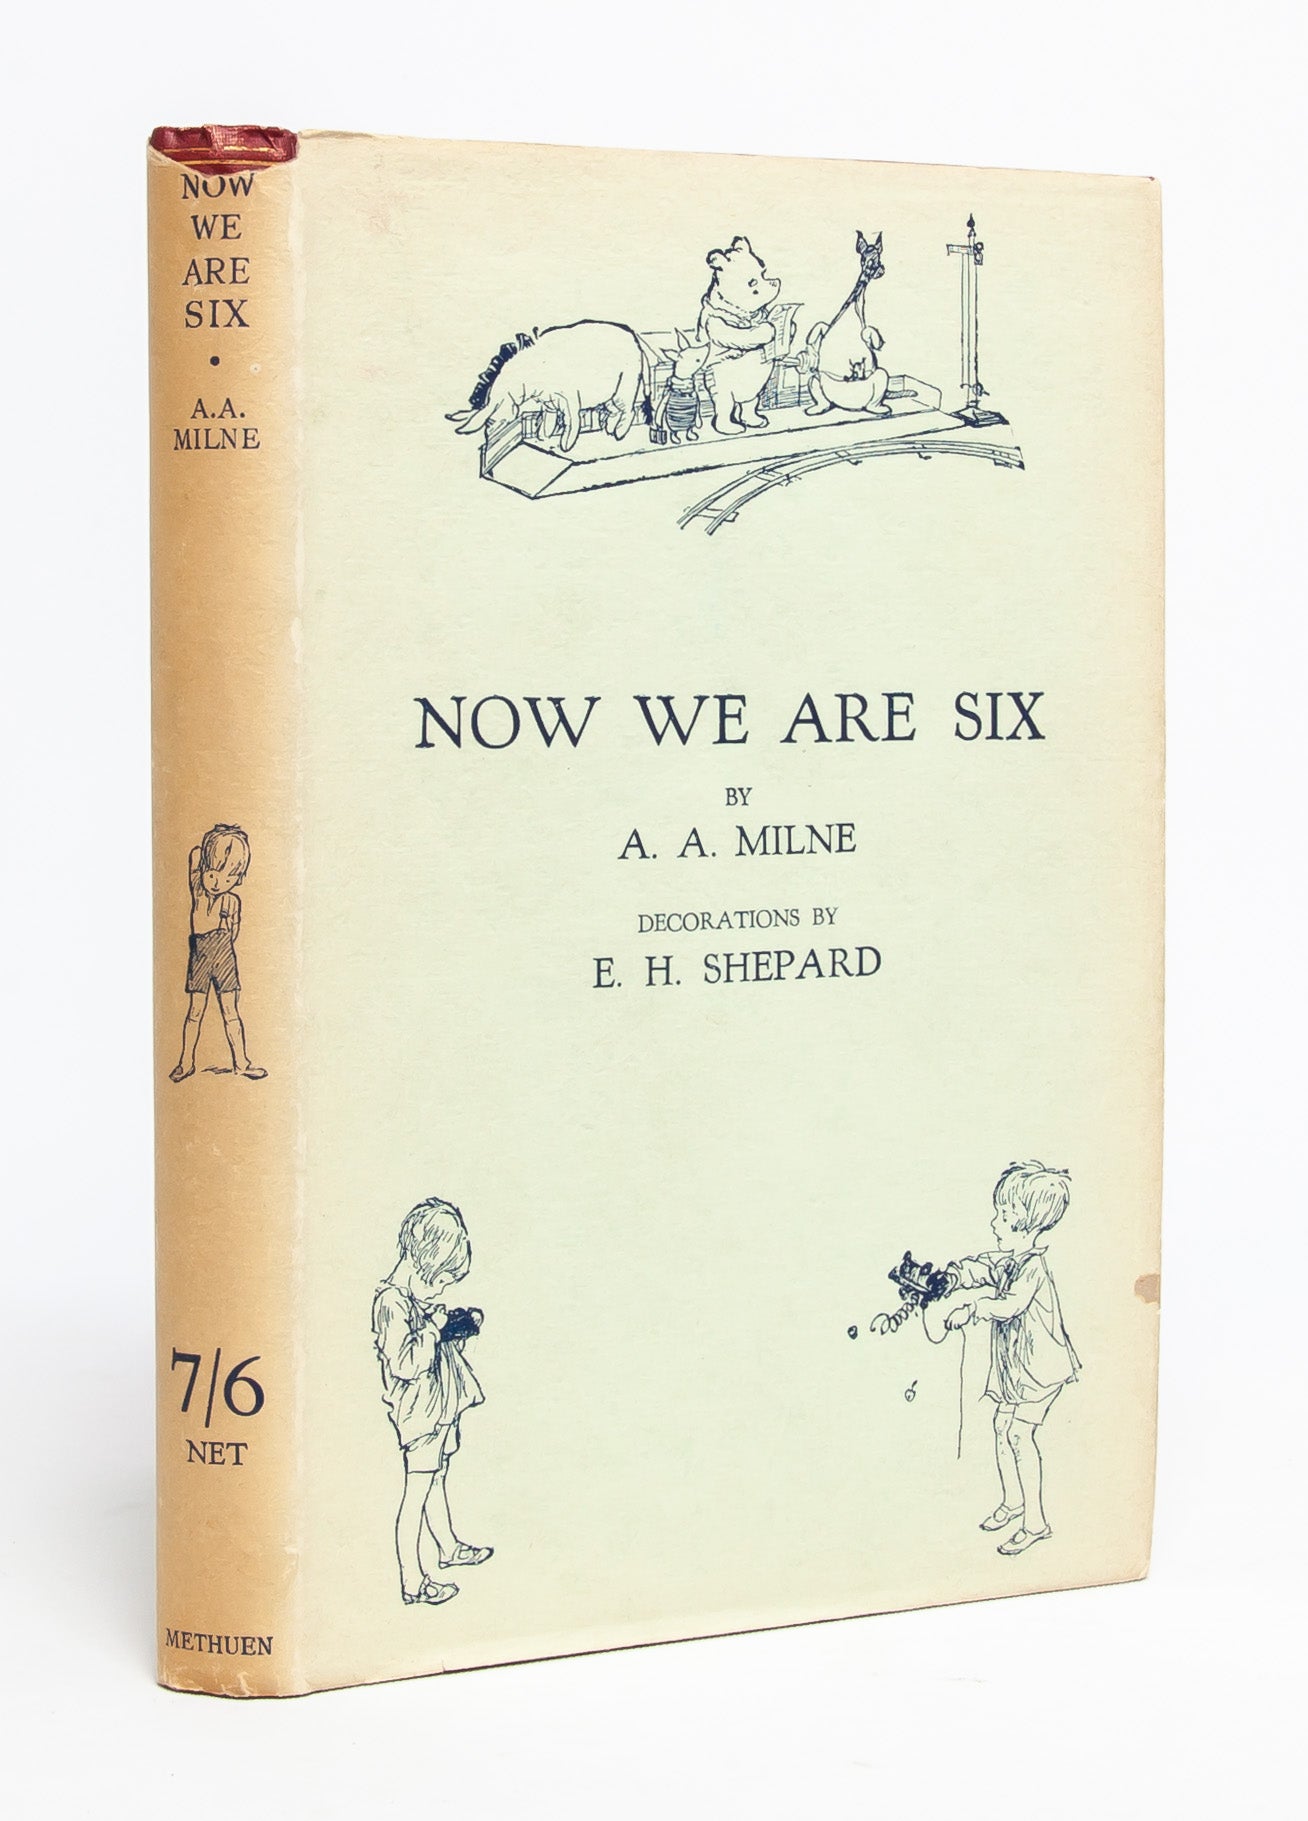 (Item #5566) Now We Are Six. A. A. Milne, E H. Shepard.